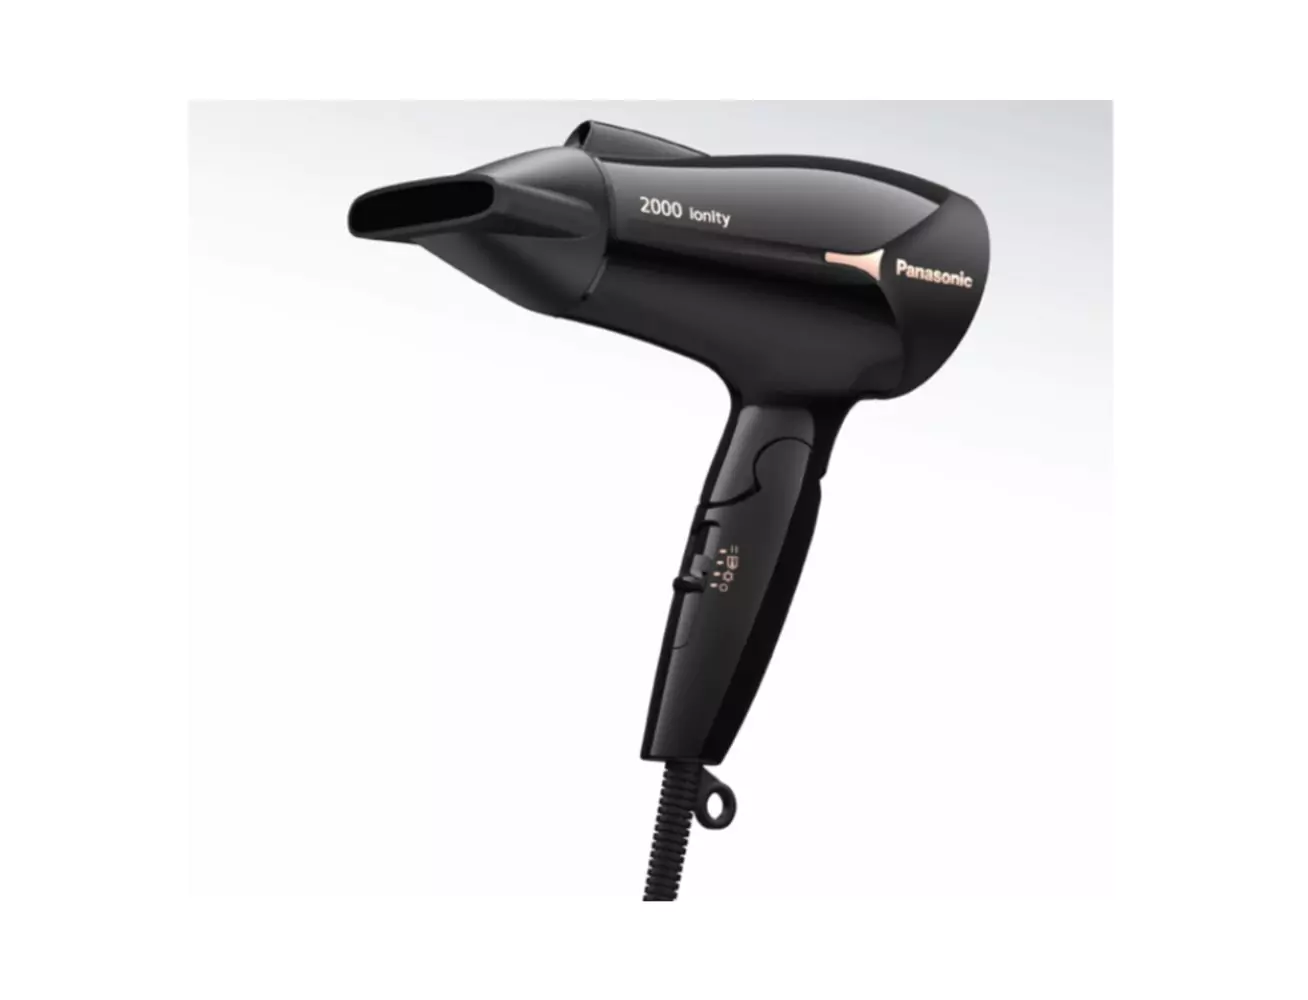 Panasonic Powerful Ionic Hair Dryer 2000 Watt with 11mm Concentrator Nozzle for Fast Drying and Smoothing Hair, EH-NE66